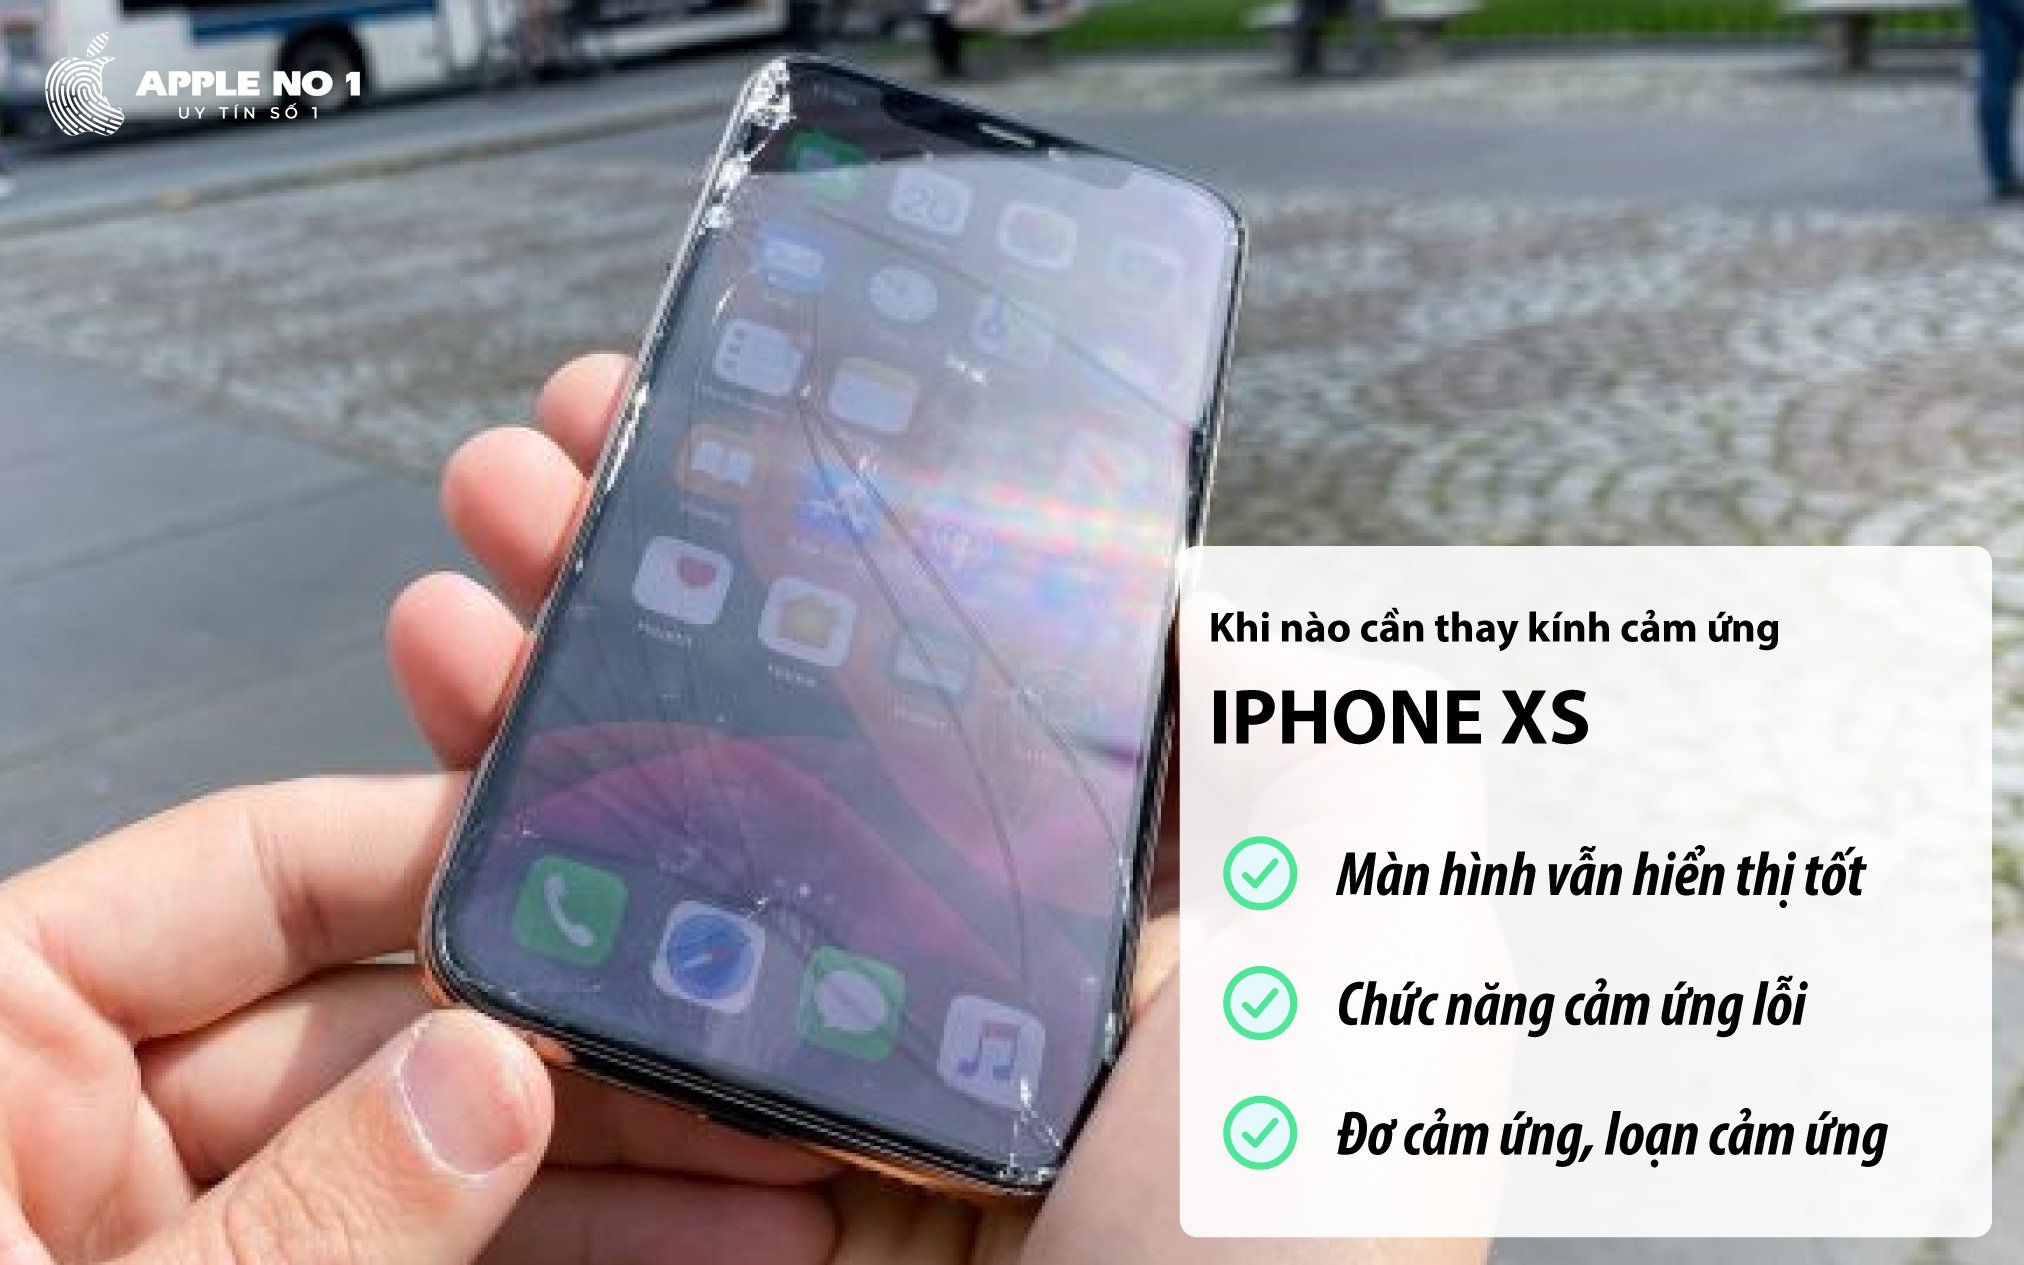 khi nao can thay kinh cam ung iphone xs?